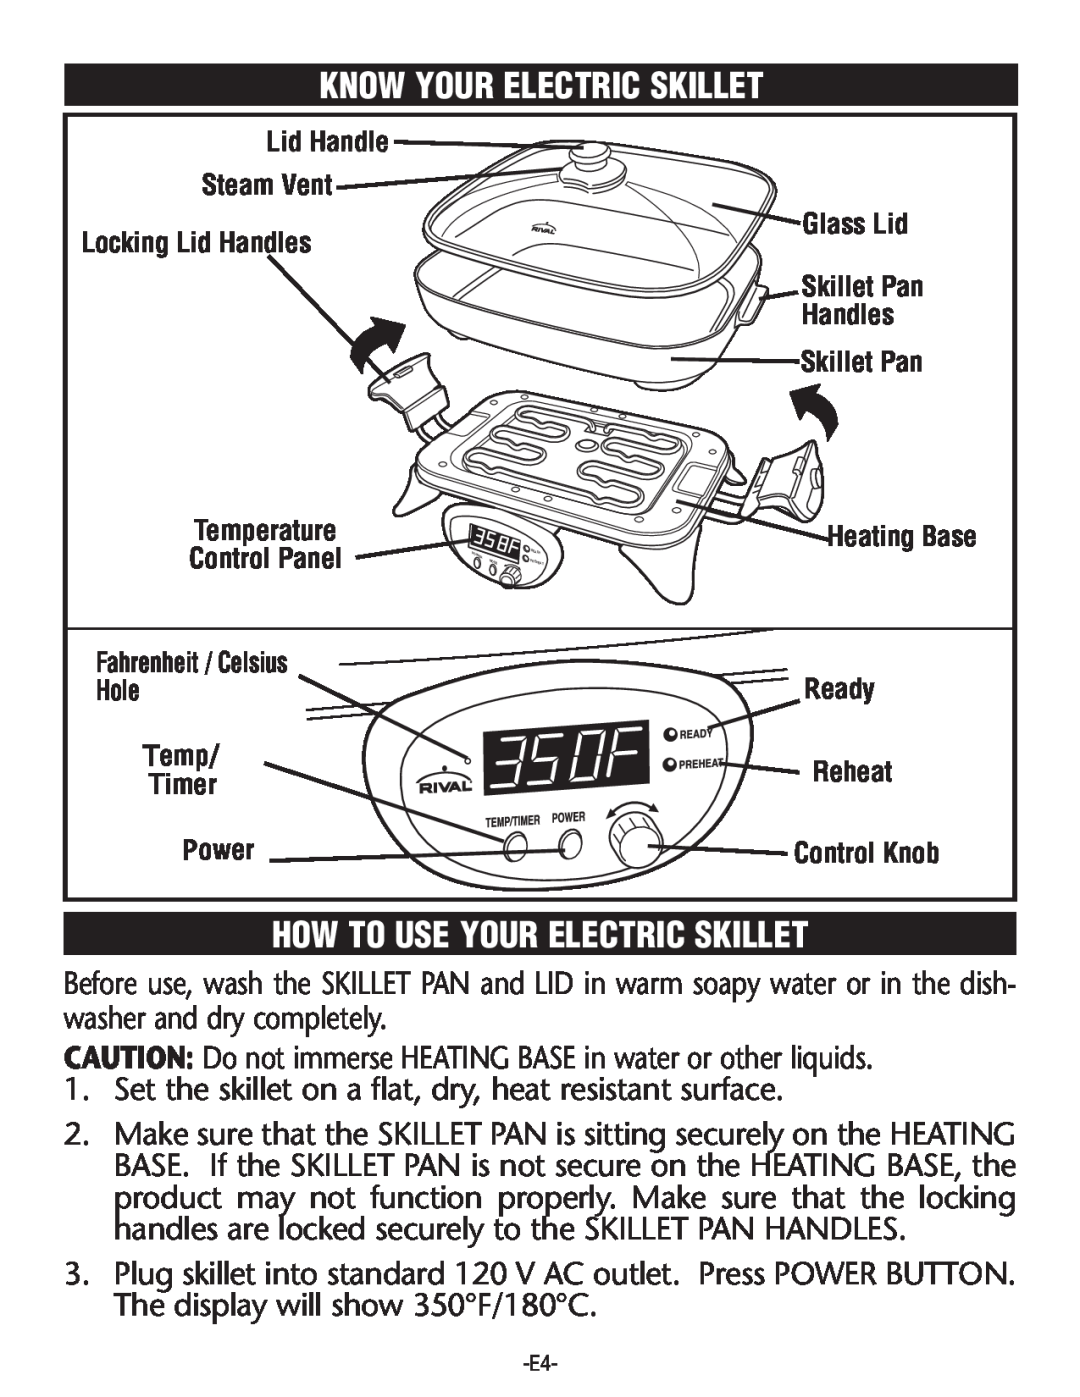 Rival S16SG-CN manual Know Your Electric Skillet, How To Use Your Electric Skillet 